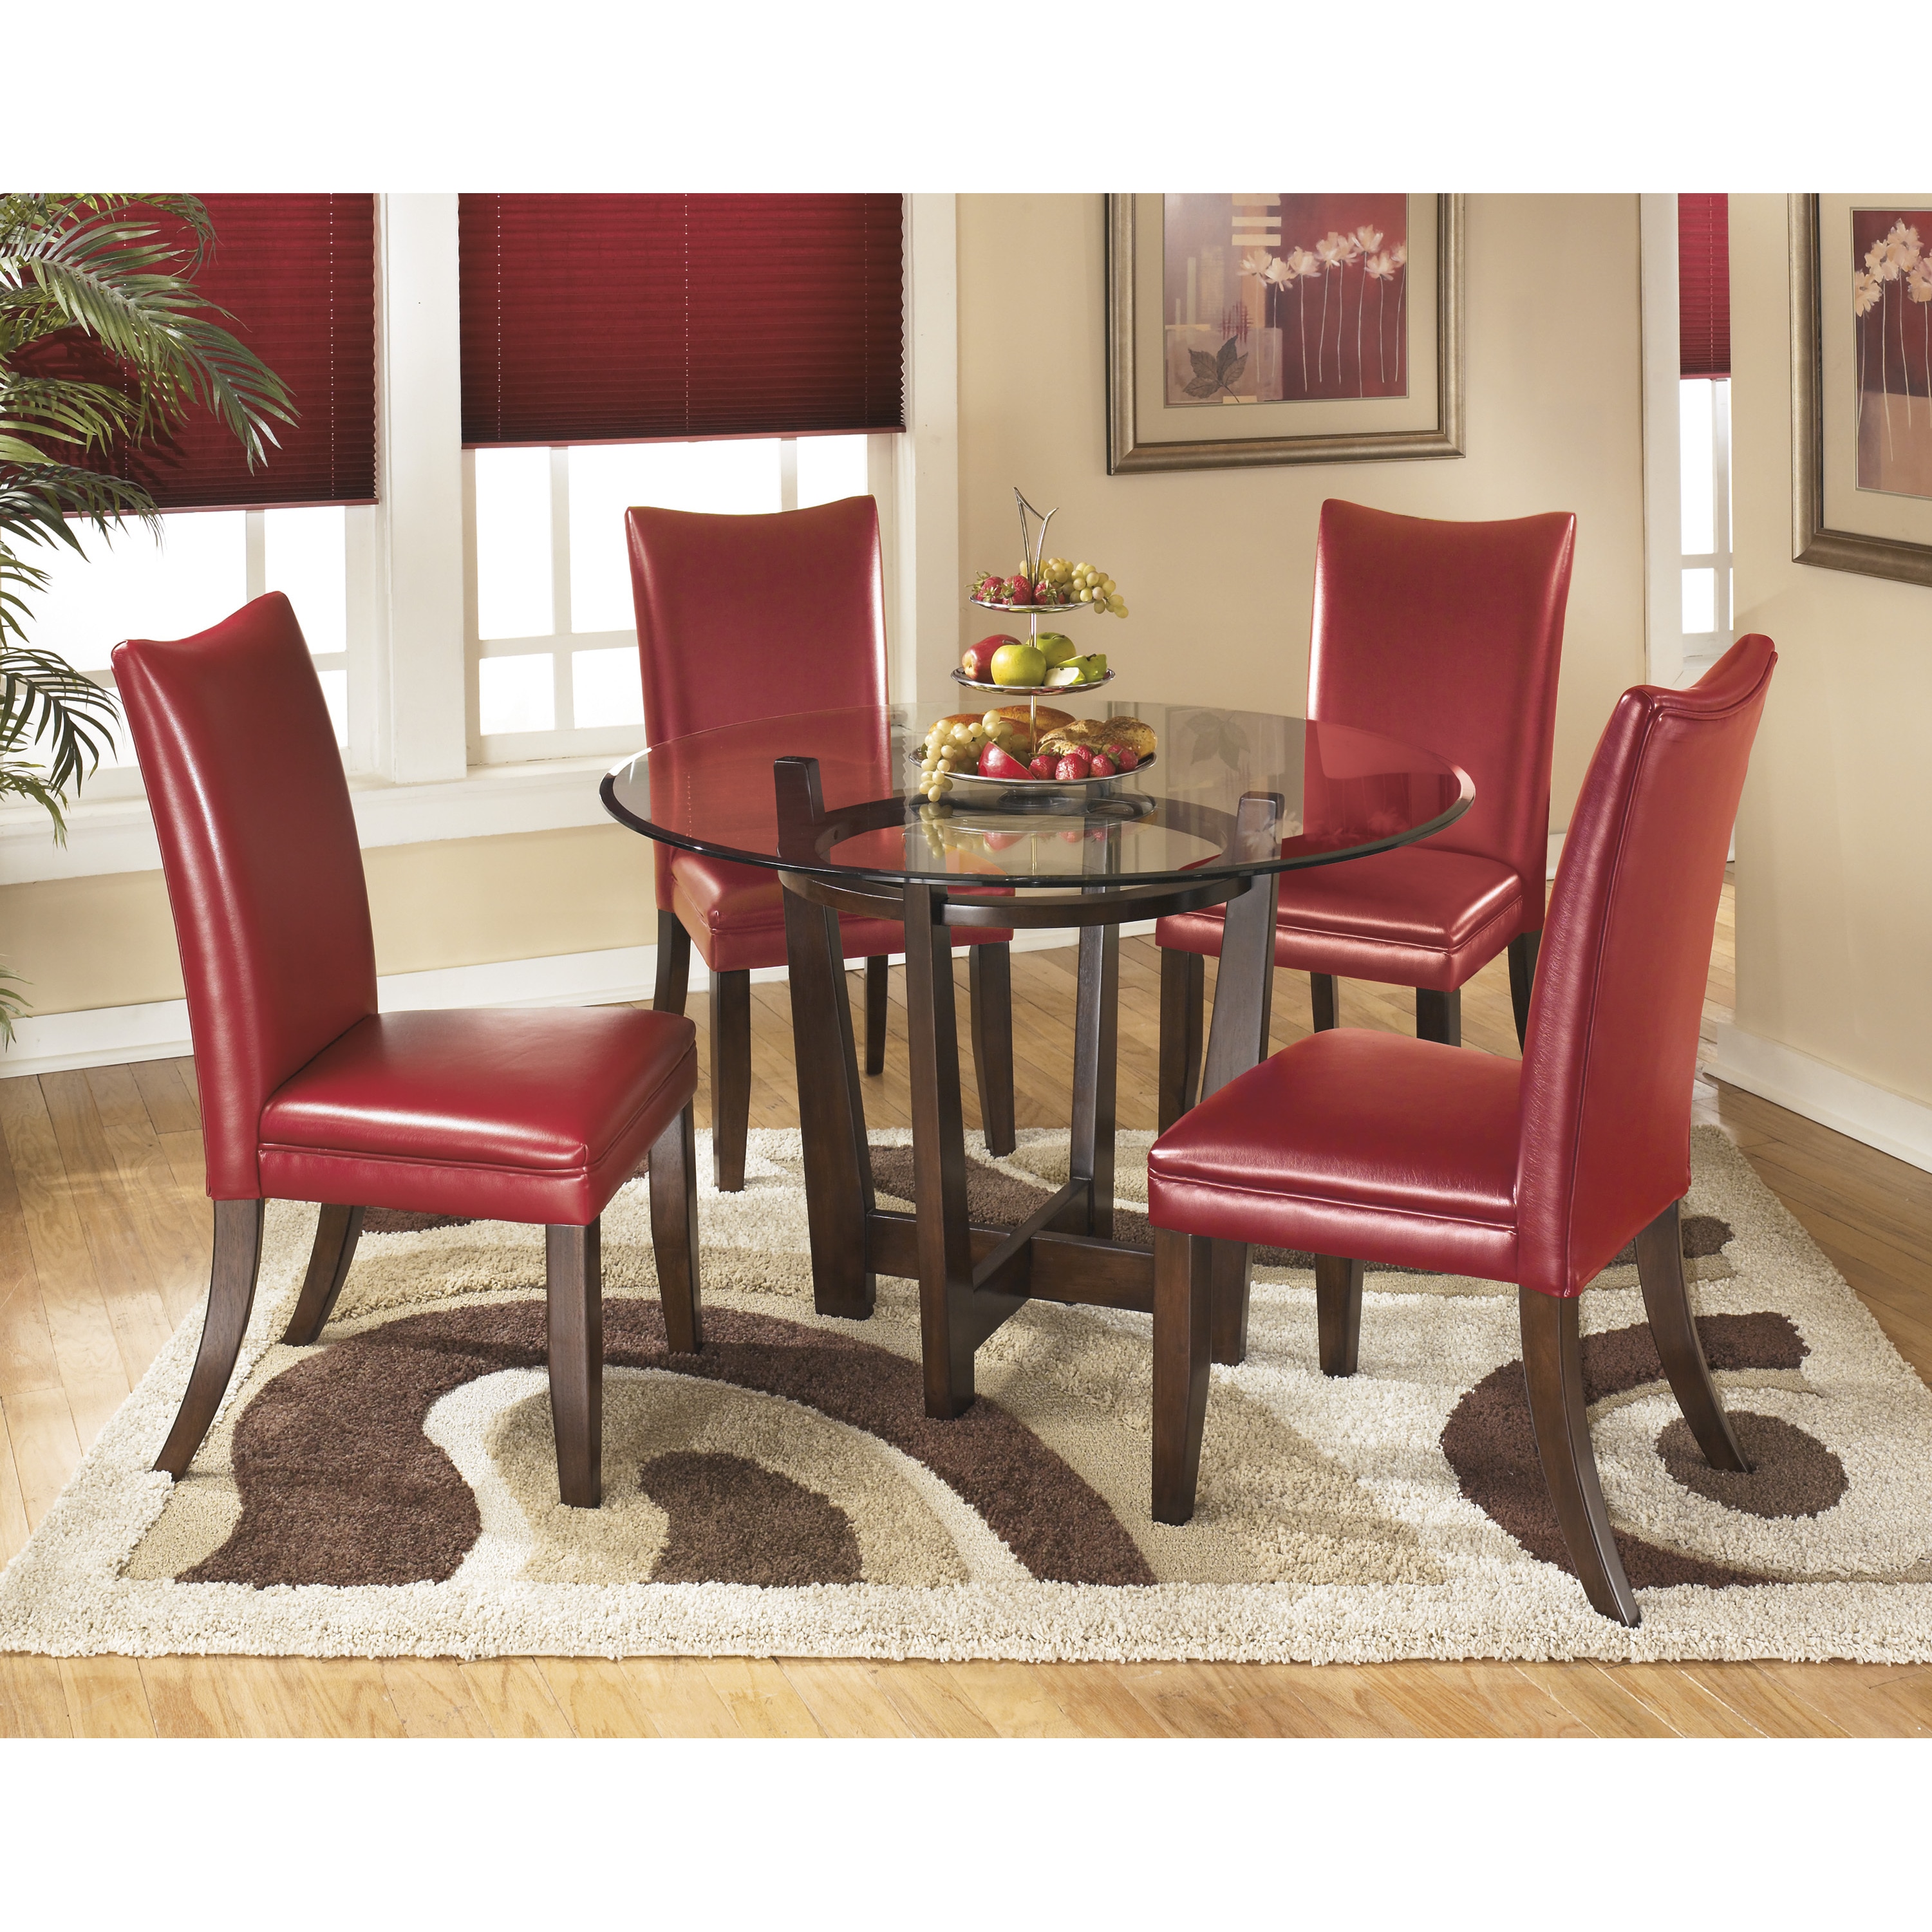 Shop For Signature Deisgns By Ashley Round 48 Inch Dining Room Table Get Free Shipping On Everything At Overstock Your Online Furniture Outlet Store Get 5 In Rewards With Club O 9207481